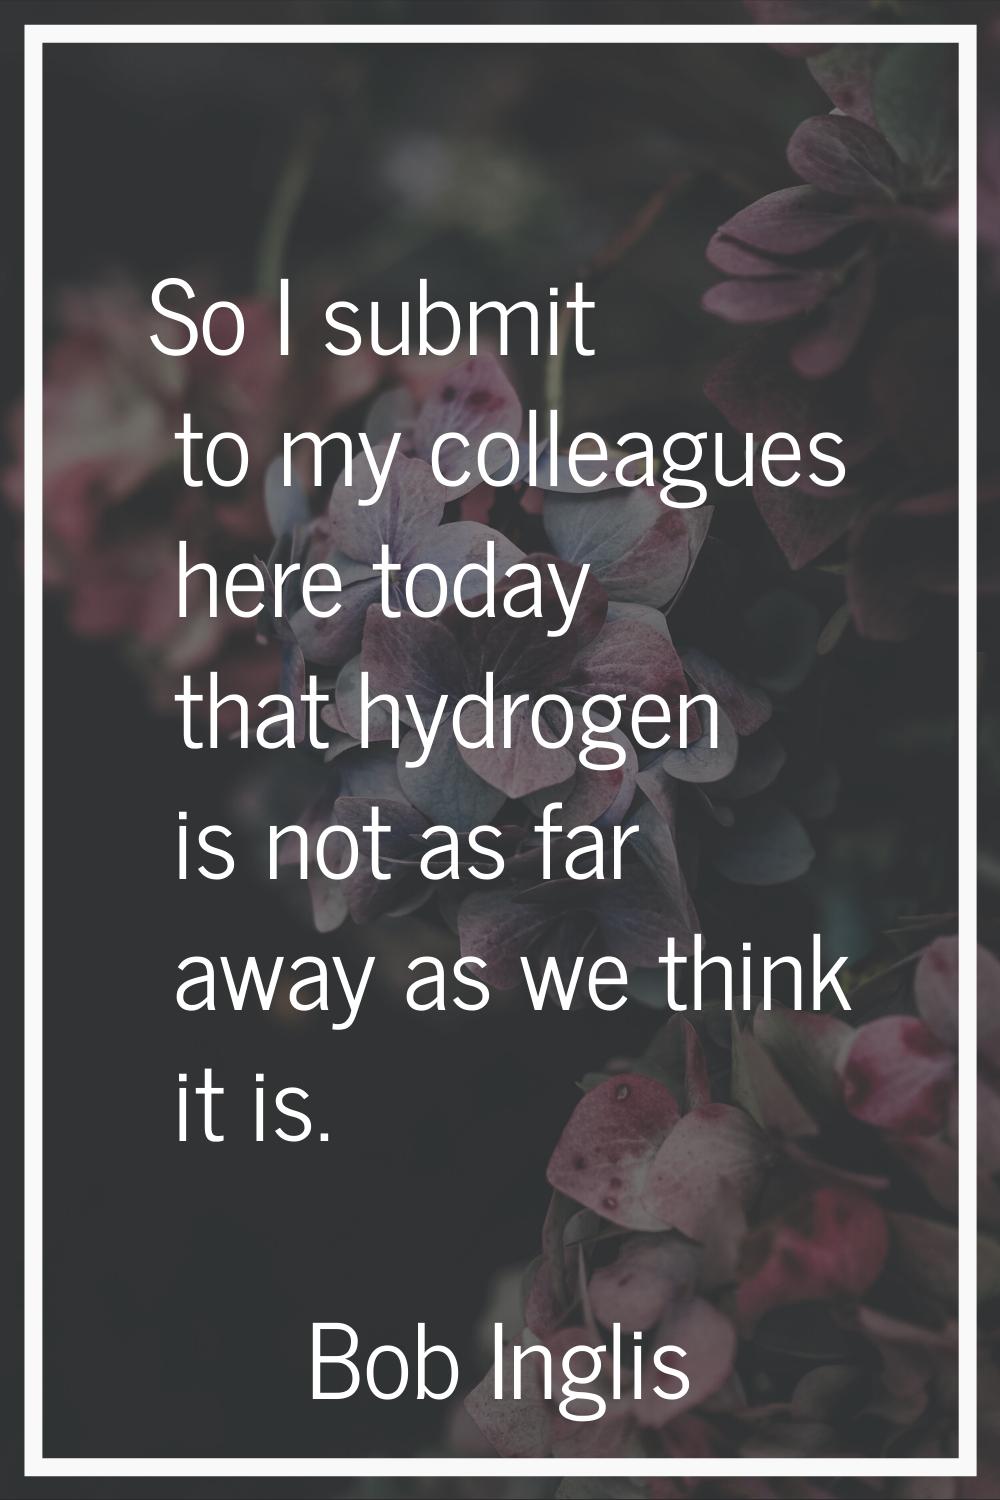 So I submit to my colleagues here today that hydrogen is not as far away as we think it is.